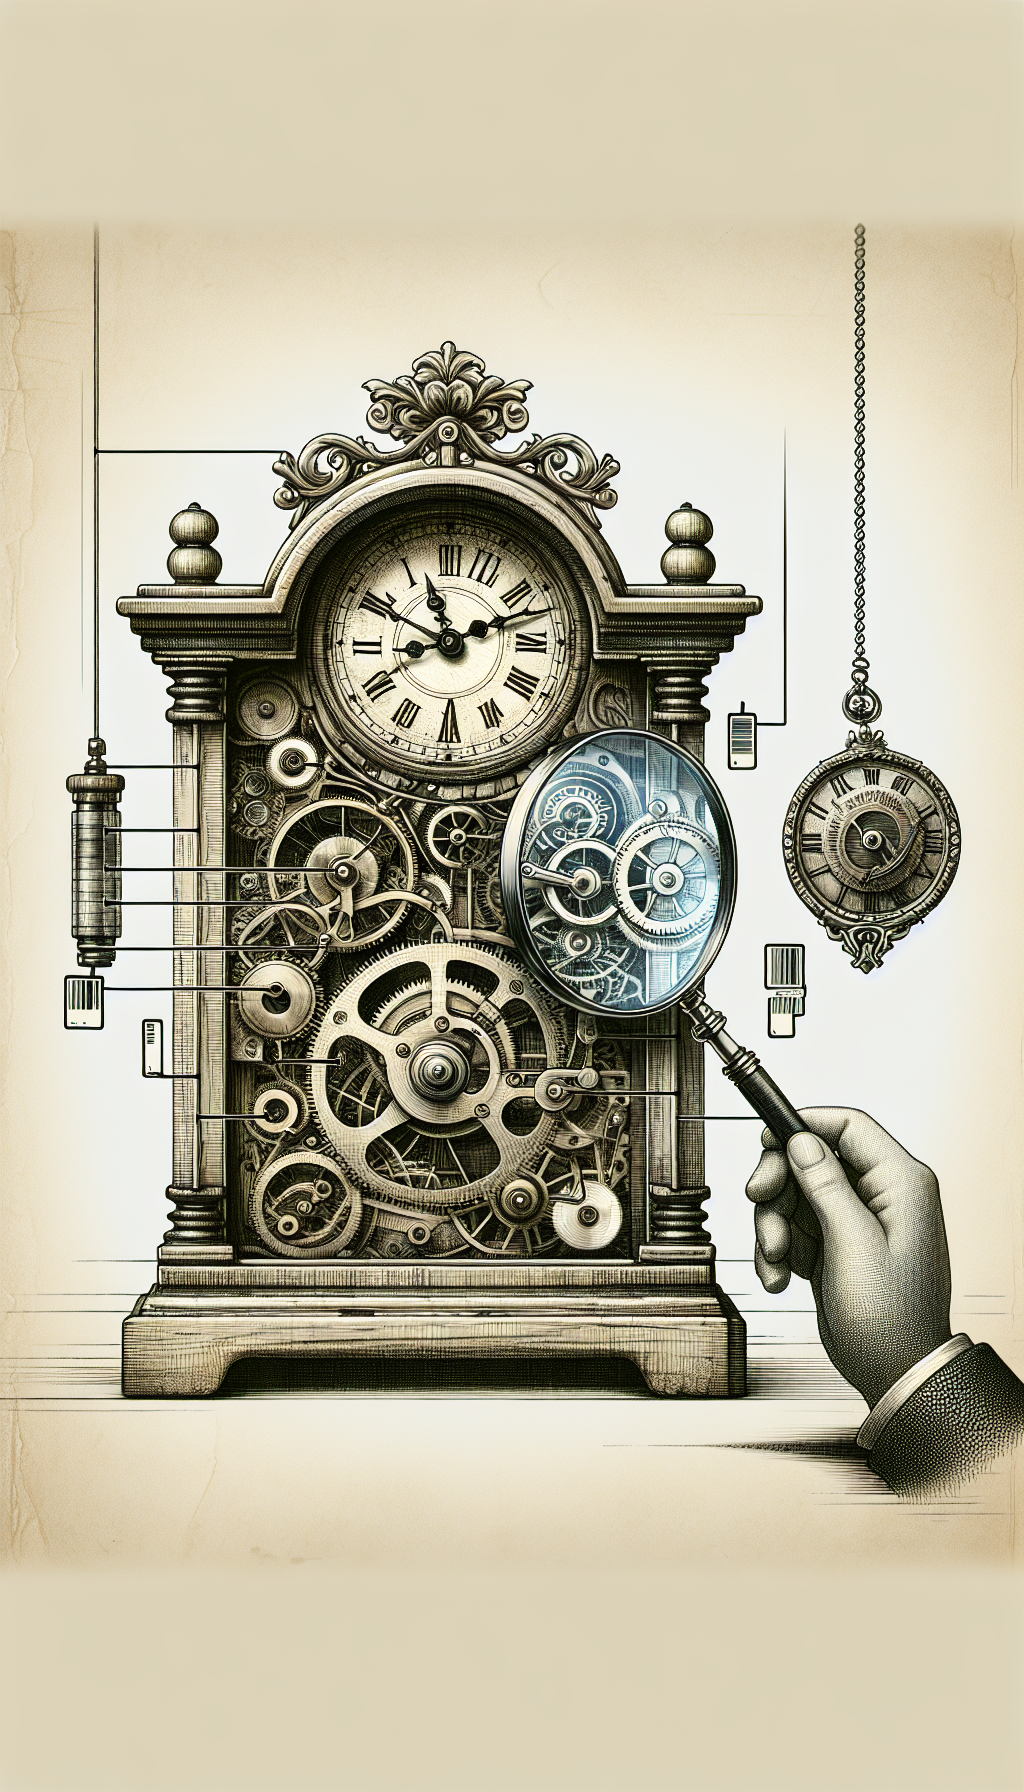 An elegant, antique mantel clock is partially deconstructed, its exposed intricate gears subtly shaped into a prestigious brand logo. A jeweler's magnifying glass hovers over, inspecting the craftsmanship, with price tags dangling from the finest components, contrasting ornate handiwork with modern barcode stickers. The clock face transitions from a vintage sketch to a sleek, digital style, symbolizing evolving valuation.